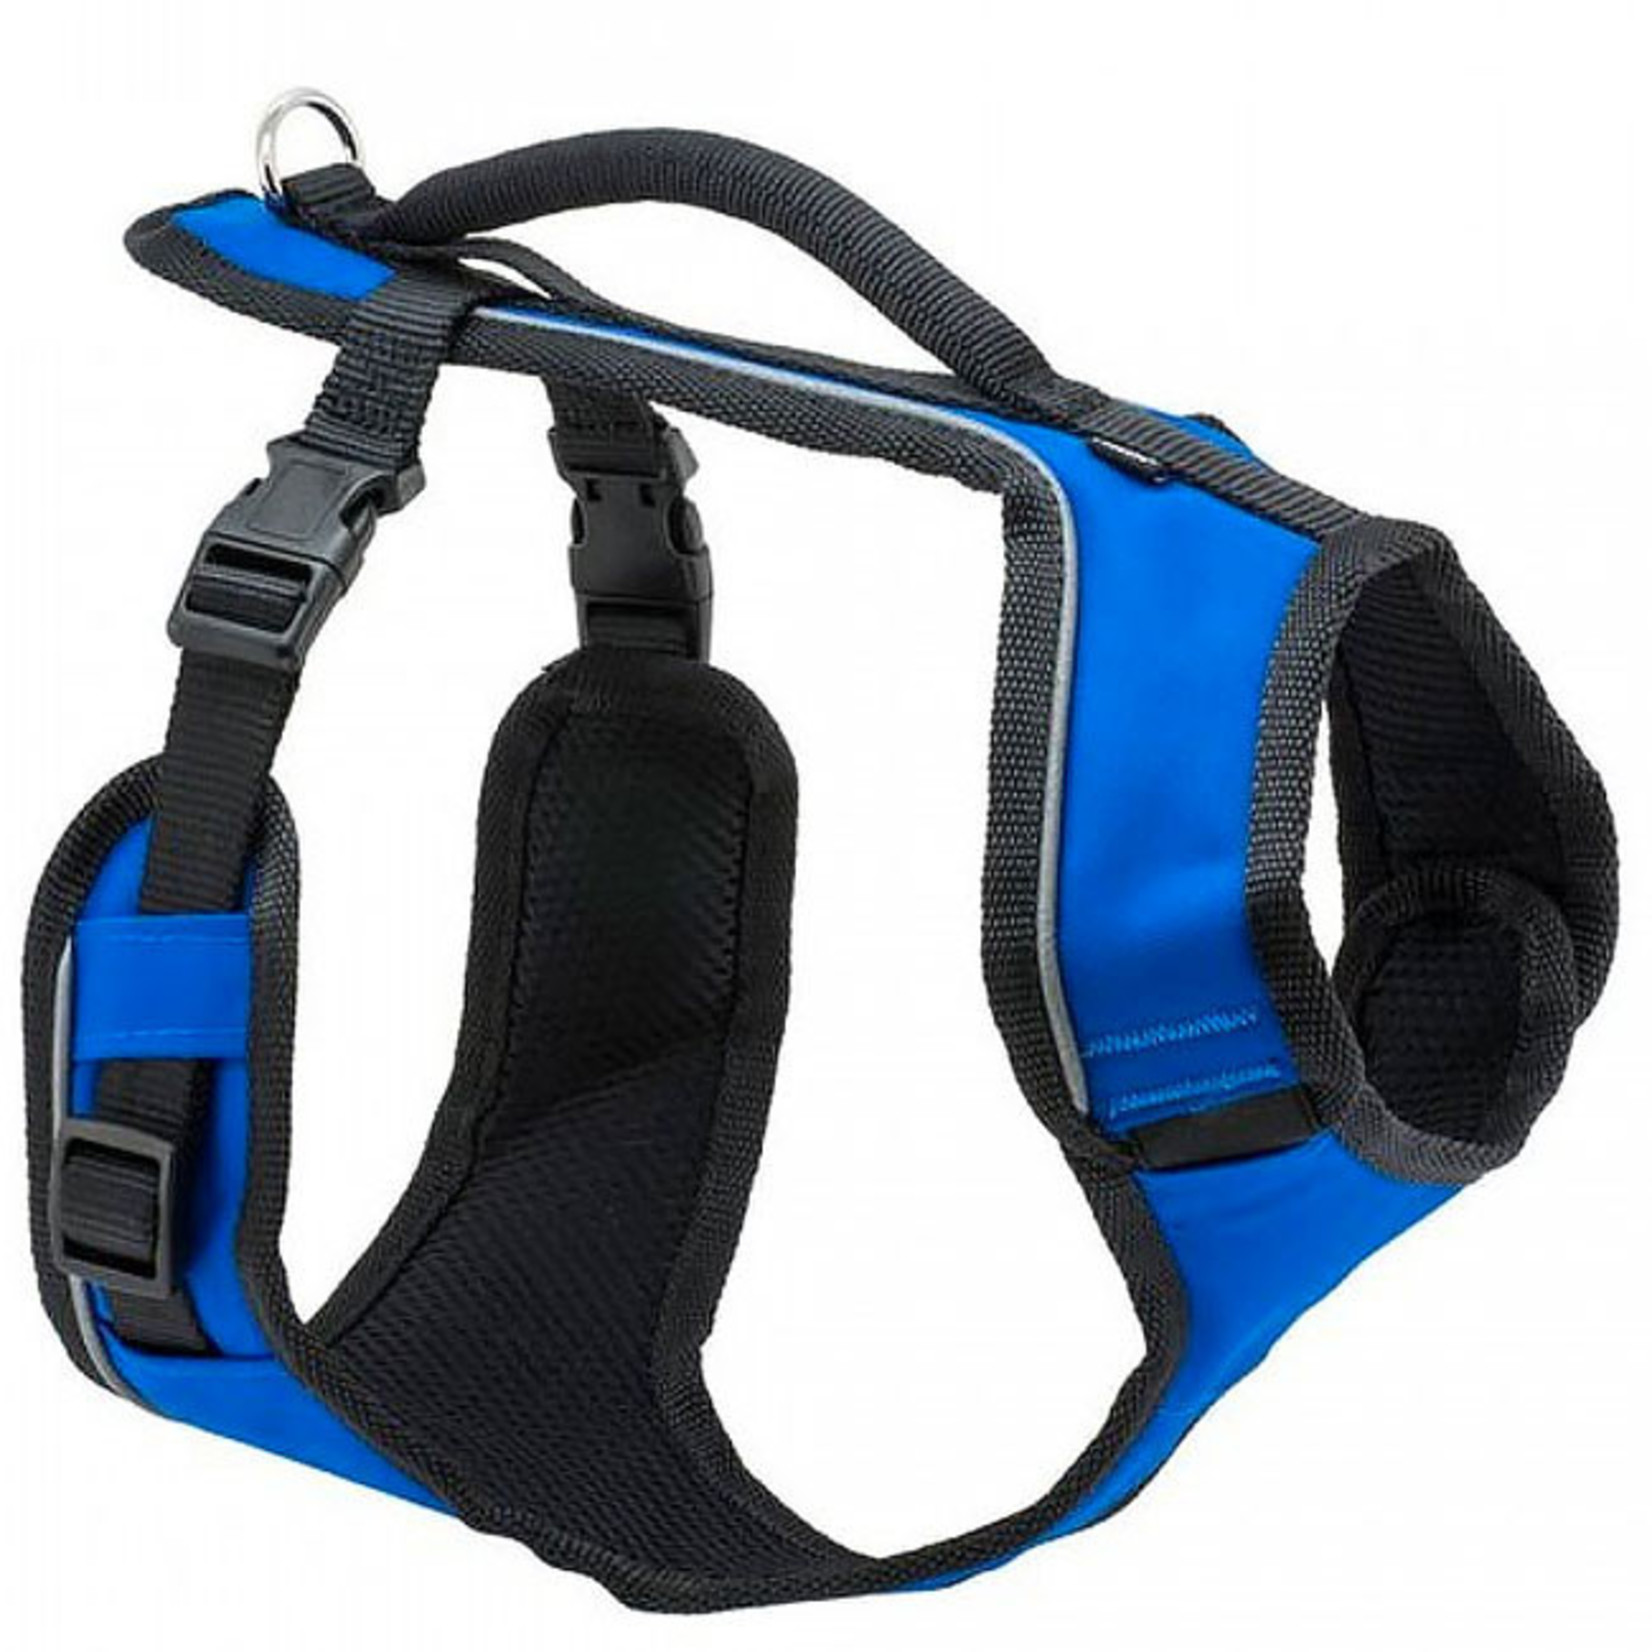 PetSafe PetSafe Easysport Padded Mesh Dog Harness with Handle and Back Clip Attachment